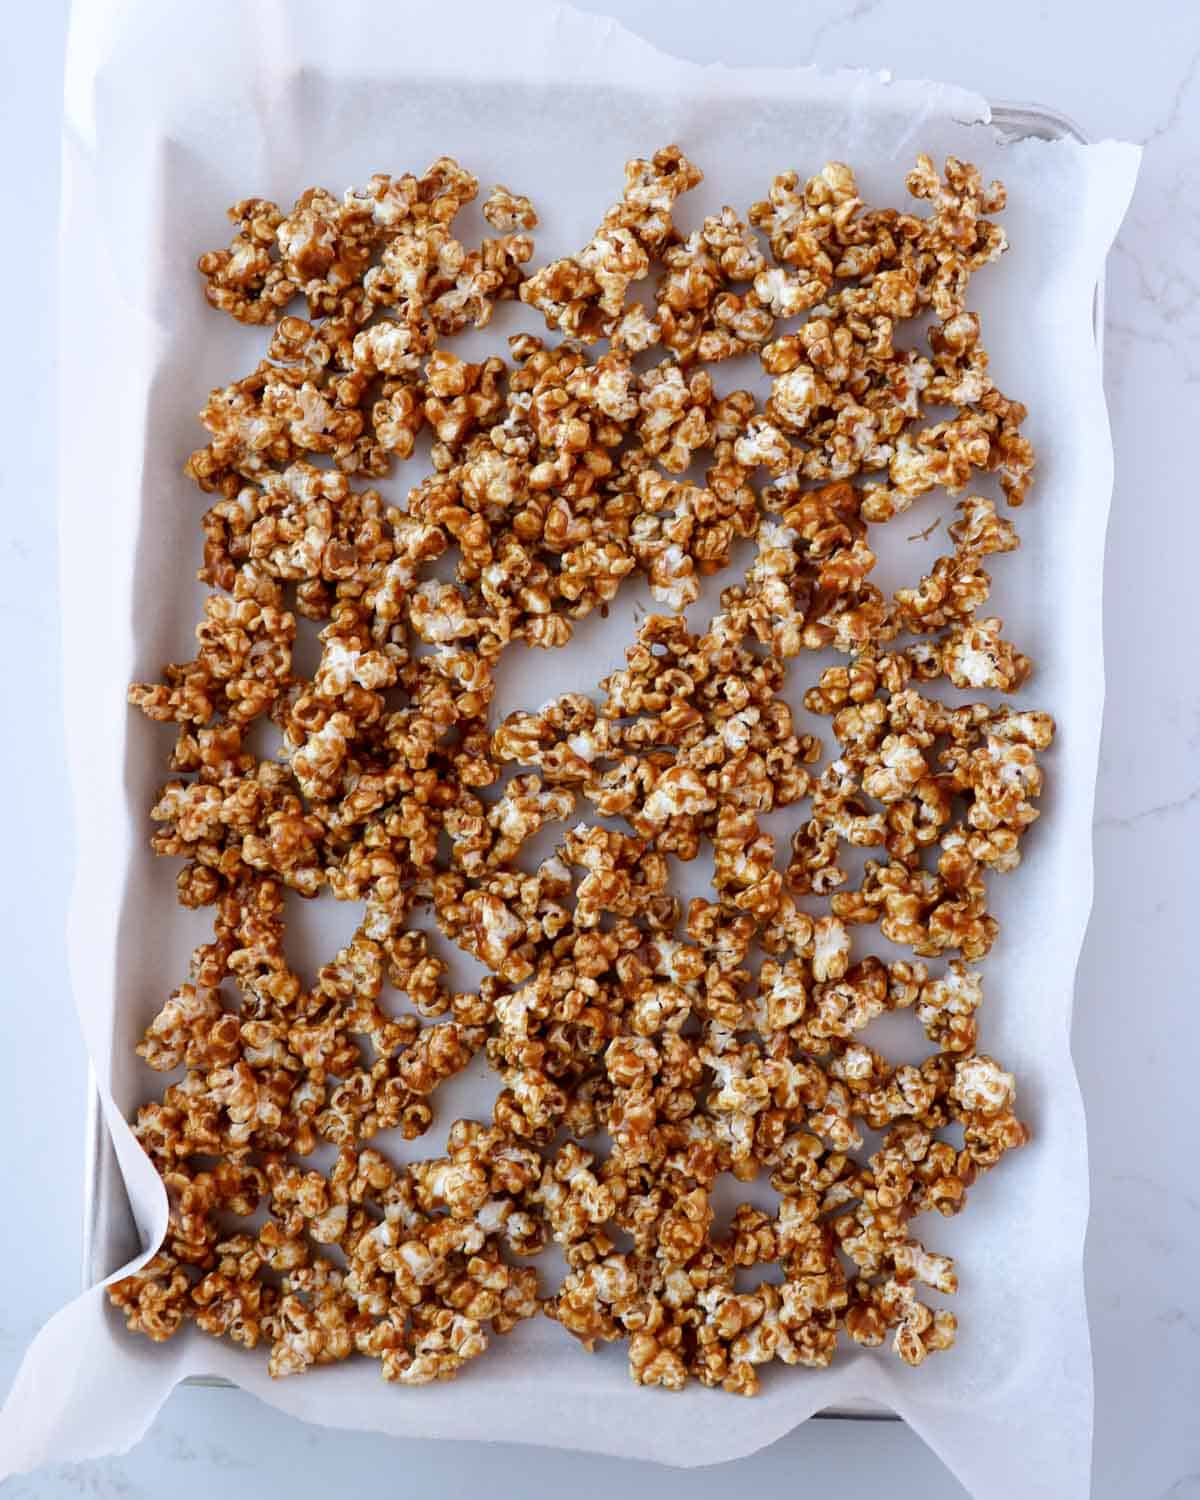 Unbaked caramel corn spread out on a baking sheet lined with parchment paper.